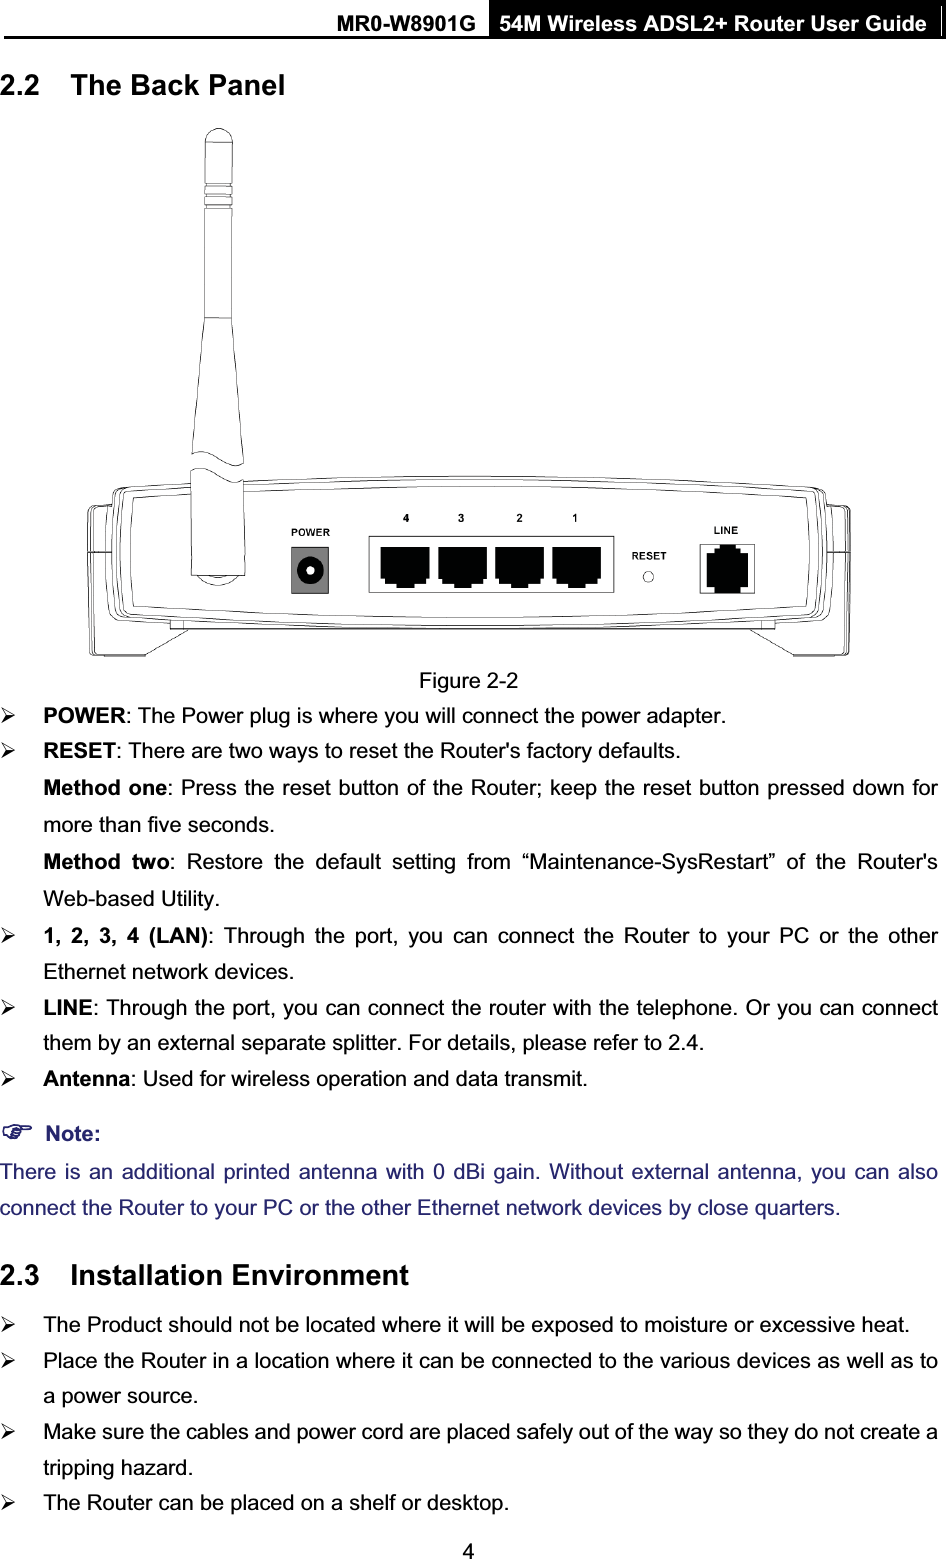 MR0-W8901G 54M Wireless ADSL2+ Router User Guide42.2 The Back Panel Figure 2-2 ¾POWER: The Power plug is where you will connect the power adapter. ¾RESET: There are two ways to reset the Router&apos;s factory defaults.   Method one: Press the reset button of the Router; keep the reset button pressed down for more than five seconds.Method two: Restore the default setting from “Maintenance-SysRestart” of the Router&apos;s Web-based Utility. ¾1, 2, 3, 4 (LAN): Through the port, you can connect the Router to your PC or the other Ethernet network devices. ¾LINE: Through the port, you can connect the router with the telephone. Or you can connect them by an external separate splitter. For details, please refer to 2.4. ¾Antenna: Used for wireless operation and data transmit. )Note:There is an additional printed antenna with 0 dBi gain. Without external antenna, you can also connect the Router to your PC or the other Ethernet network devices by close quarters. 2.3 Installation Environment ¾  The Product should not be located where it will be exposed to moisture or excessive heat. ¾  Place the Router in a location where it can be connected to the various devices as well as to a power source. ¾  Make sure the cables and power cord are placed safely out of the way so they do not create a tripping hazard. ¾  The Router can be placed on a shelf or desktop. 